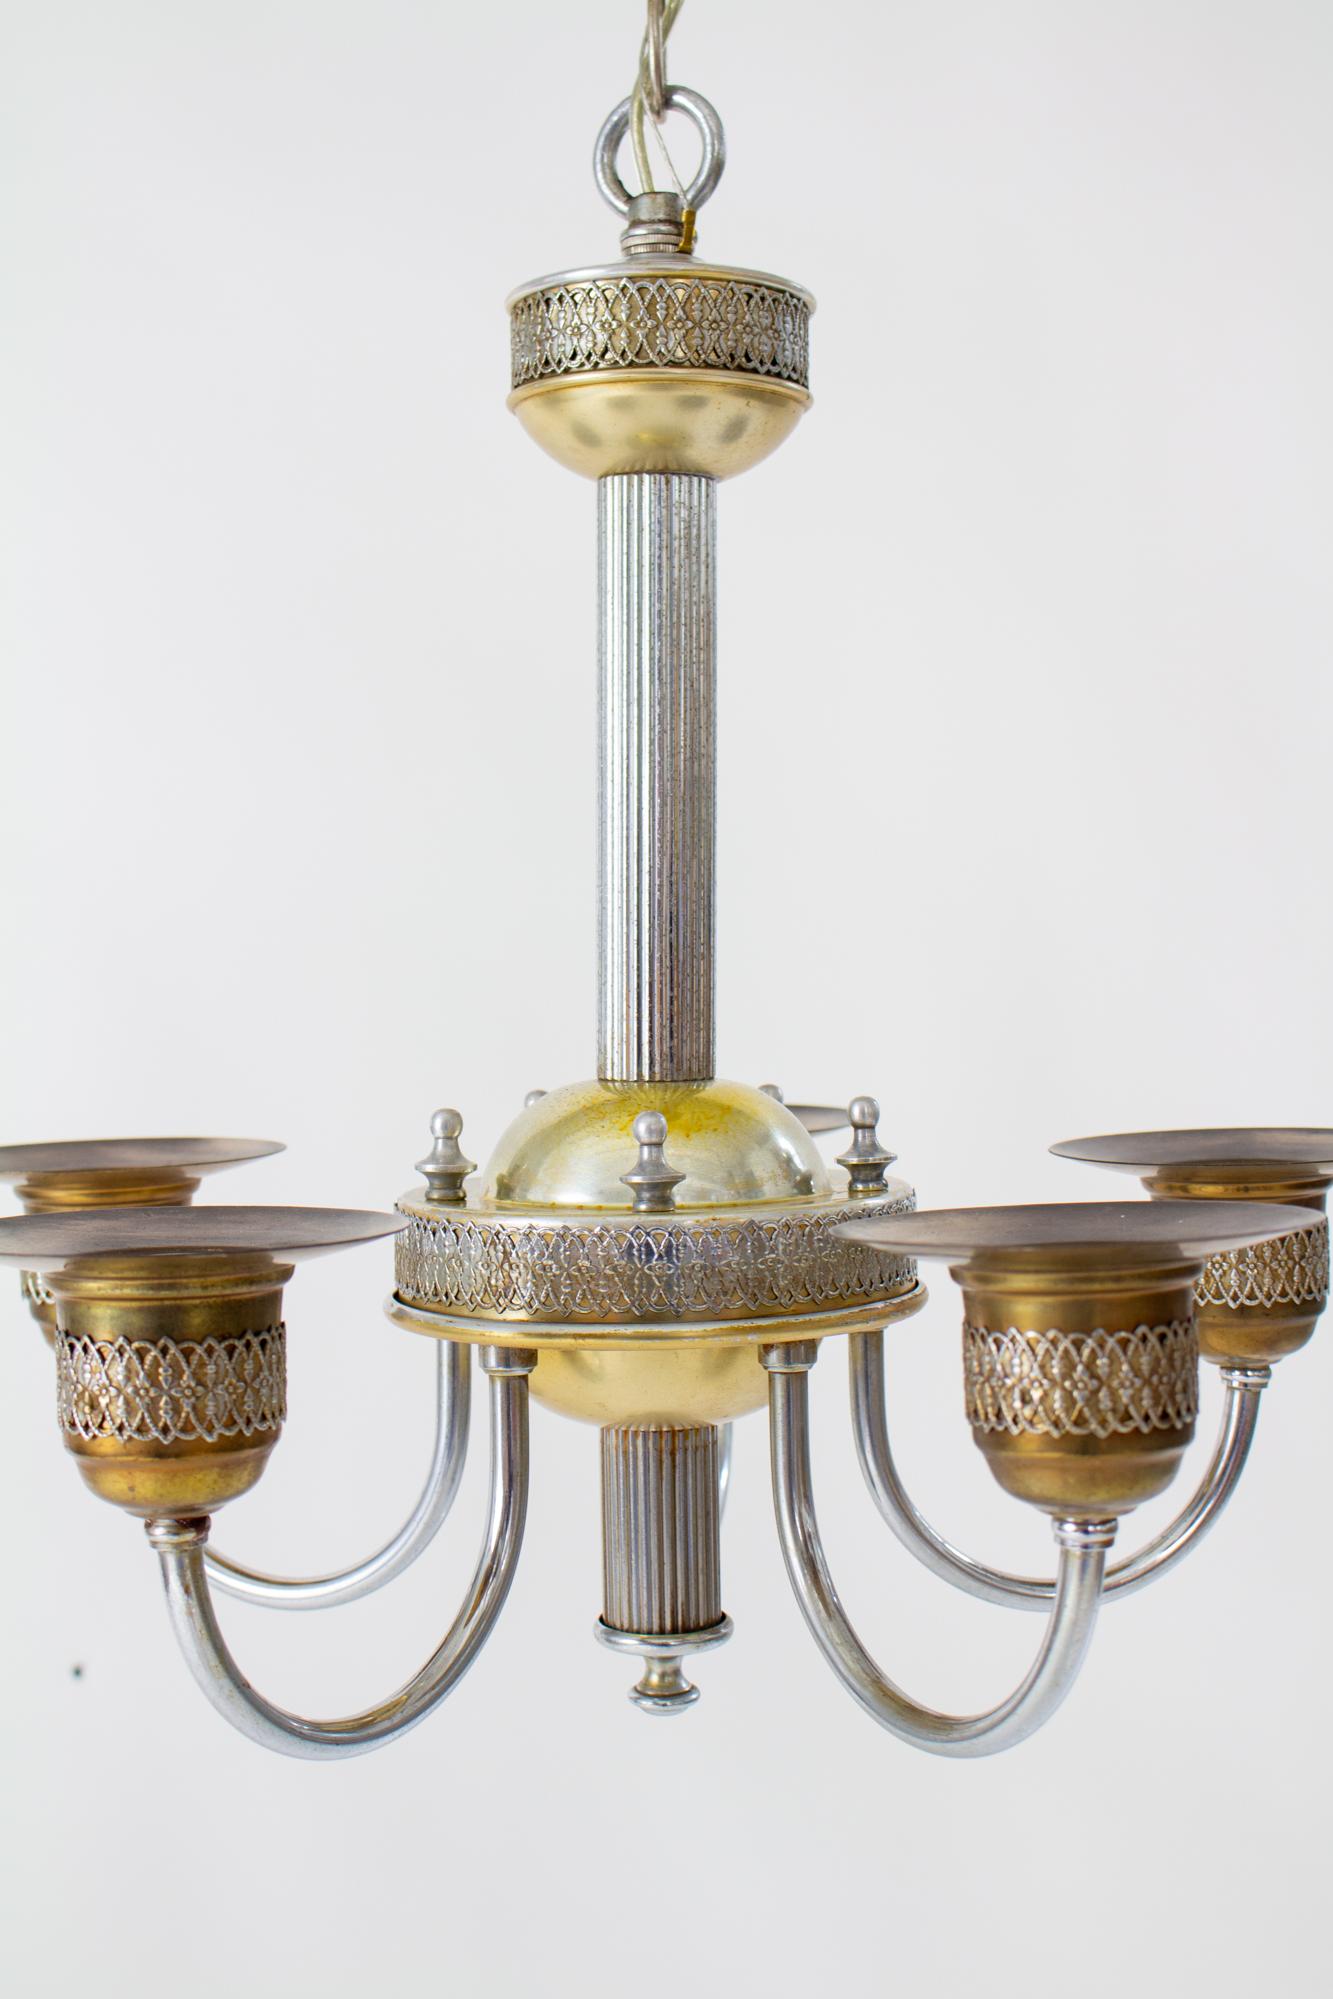 1930’s Art Deco Chandelier with Iridescent Glass For Sale 2